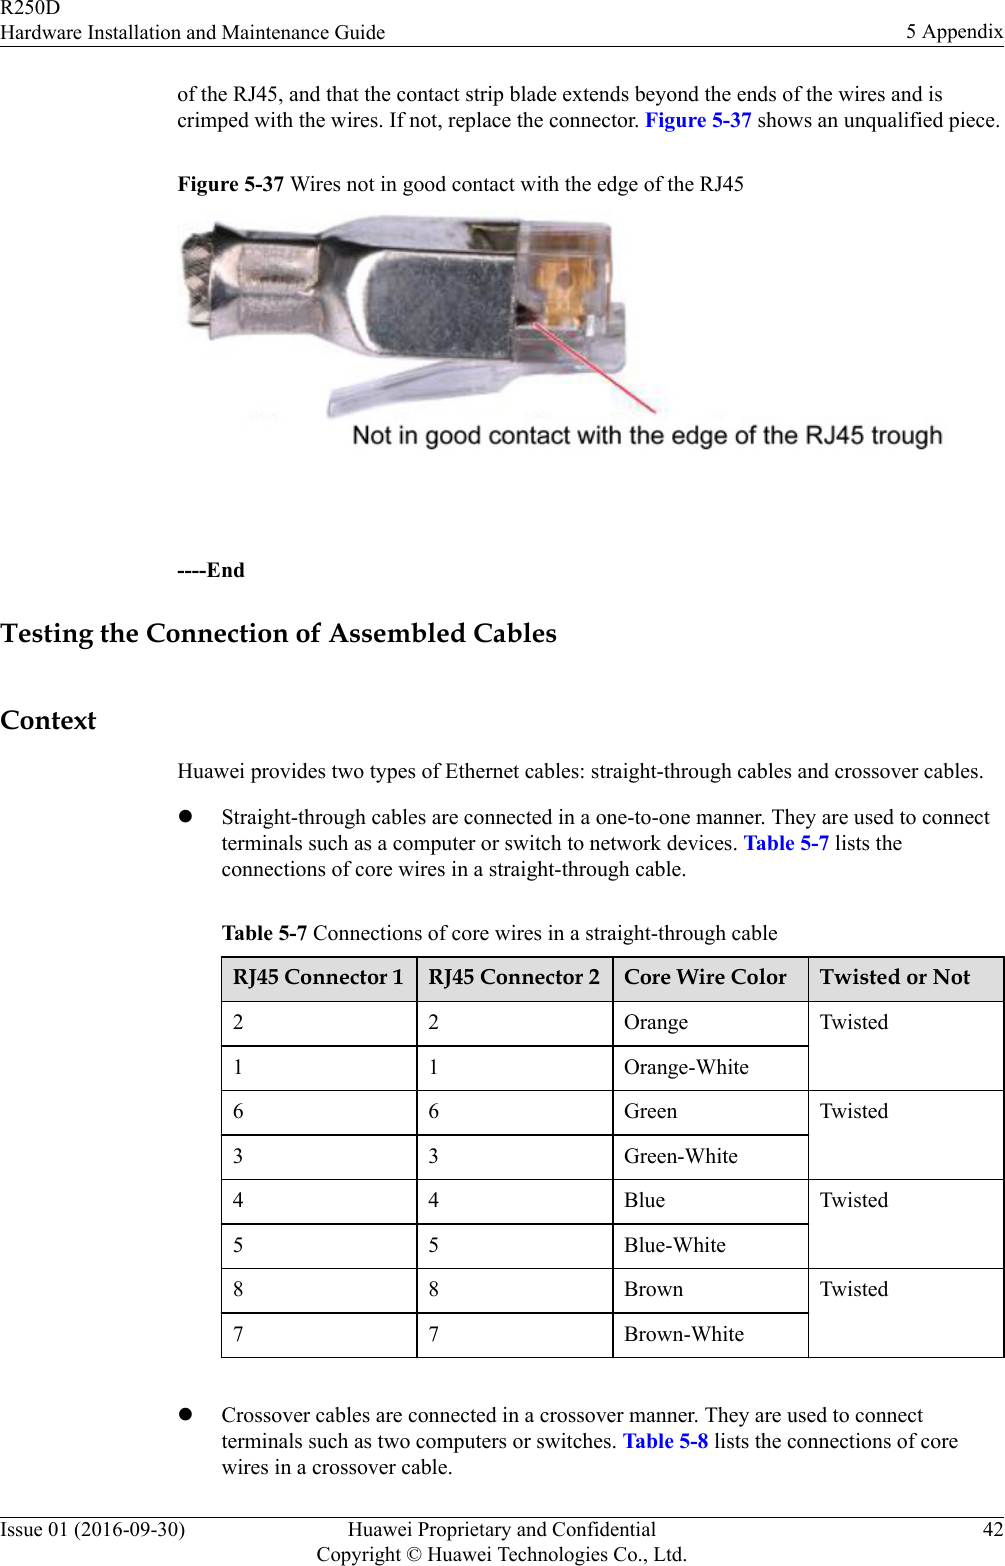 of the RJ45, and that the contact strip blade extends beyond the ends of the wires and iscrimped with the wires. If not, replace the connector. Figure 5-37 shows an unqualified piece.Figure 5-37 Wires not in good contact with the edge of the RJ45 ----EndTesting the Connection of Assembled CablesContextHuawei provides two types of Ethernet cables: straight-through cables and crossover cables.lStraight-through cables are connected in a one-to-one manner. They are used to connectterminals such as a computer or switch to network devices. Table 5-7 lists theconnections of core wires in a straight-through cable.Table 5-7 Connections of core wires in a straight-through cableRJ45 Connector 1 RJ45 Connector 2 Core Wire Color Twisted or Not2 2 Orange Twisted1 1 Orange-White6 6 Green Twisted3 3 Green-White4 4 Blue Twisted5 5 Blue-White8 8 Brown Twisted7 7 Brown-White lCrossover cables are connected in a crossover manner. They are used to connectterminals such as two computers or switches. Table 5-8 lists the connections of corewires in a crossover cable.R250DHardware Installation and Maintenance Guide 5 AppendixIssue 01 (2016-09-30) Huawei Proprietary and ConfidentialCopyright © Huawei Technologies Co., Ltd.42